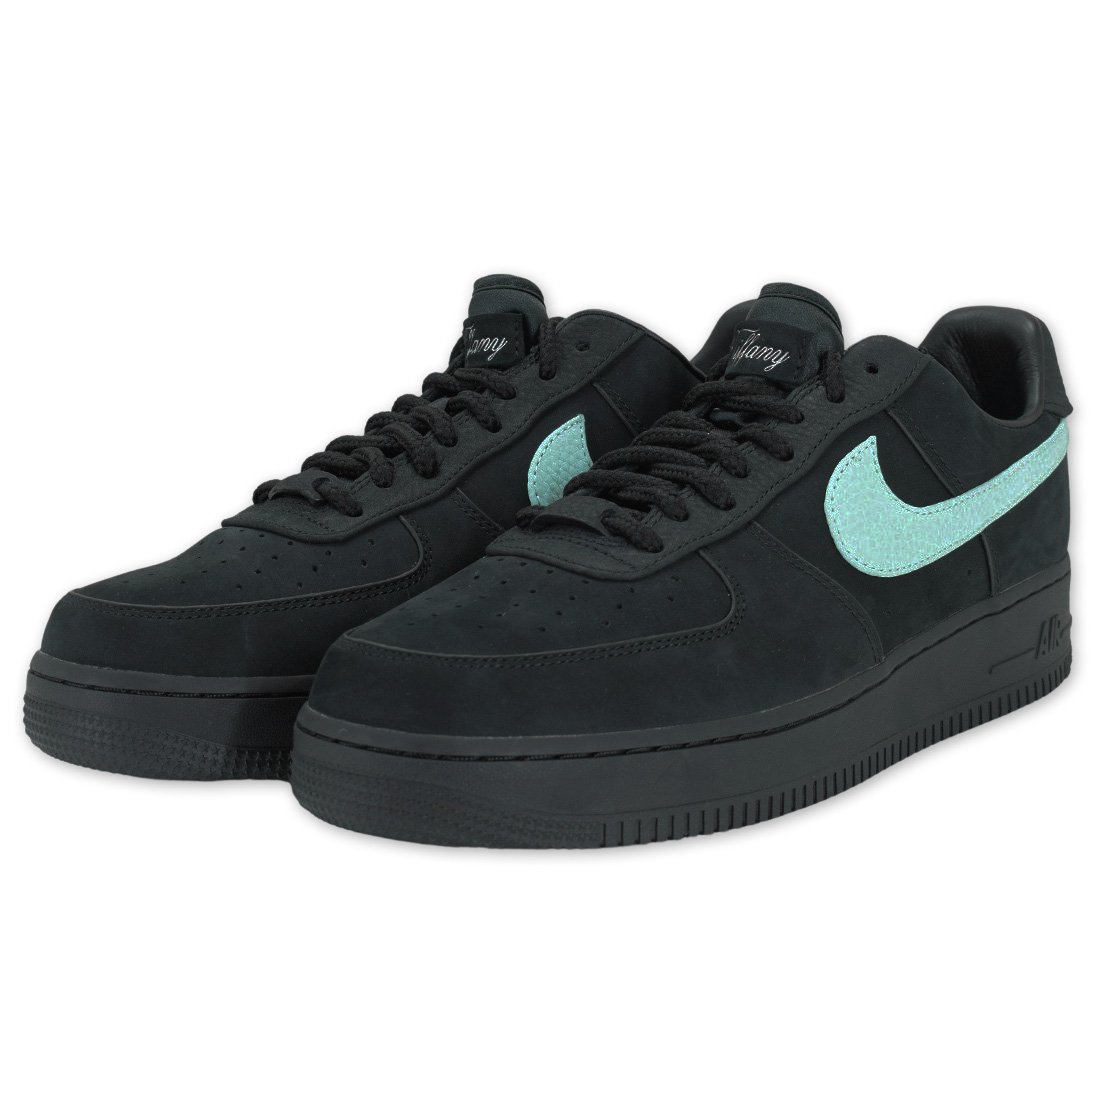 NIKE X Tiffany & Co. AIR FORCE 1 LOW